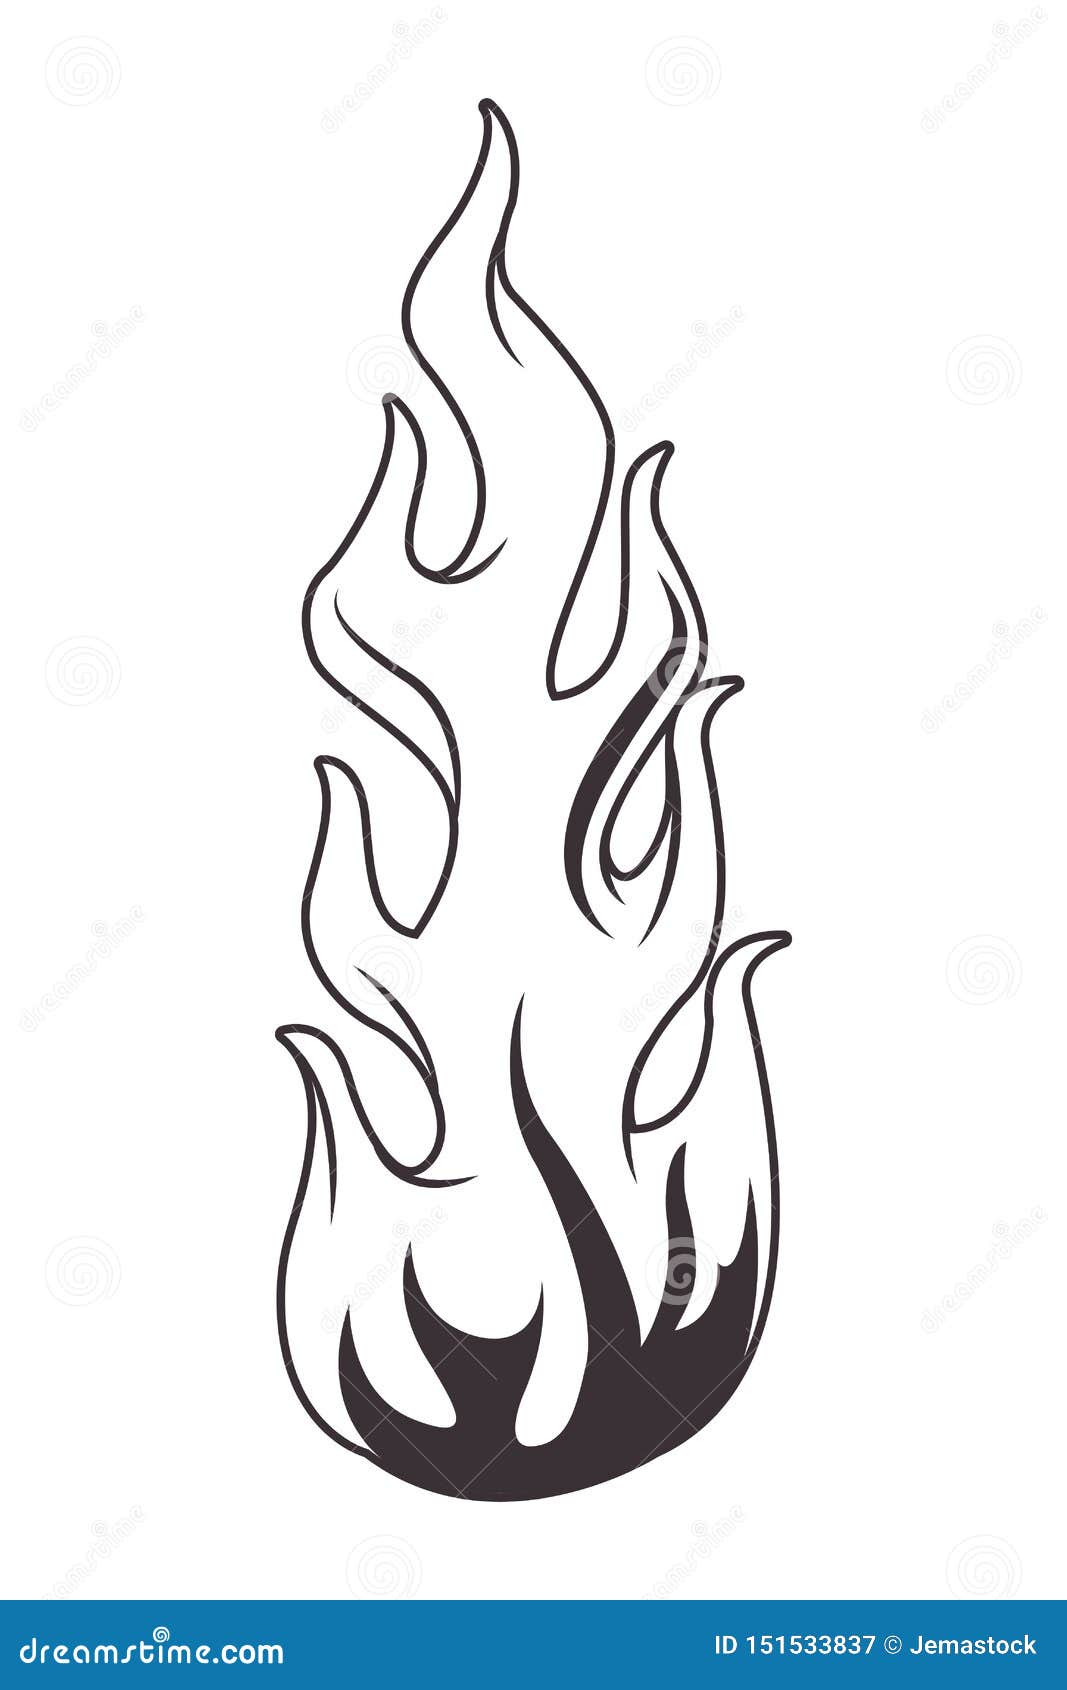 Fire Flame Drawn Tattoo Icon Stock Vector - Illustration of element, wildlife: 151533837